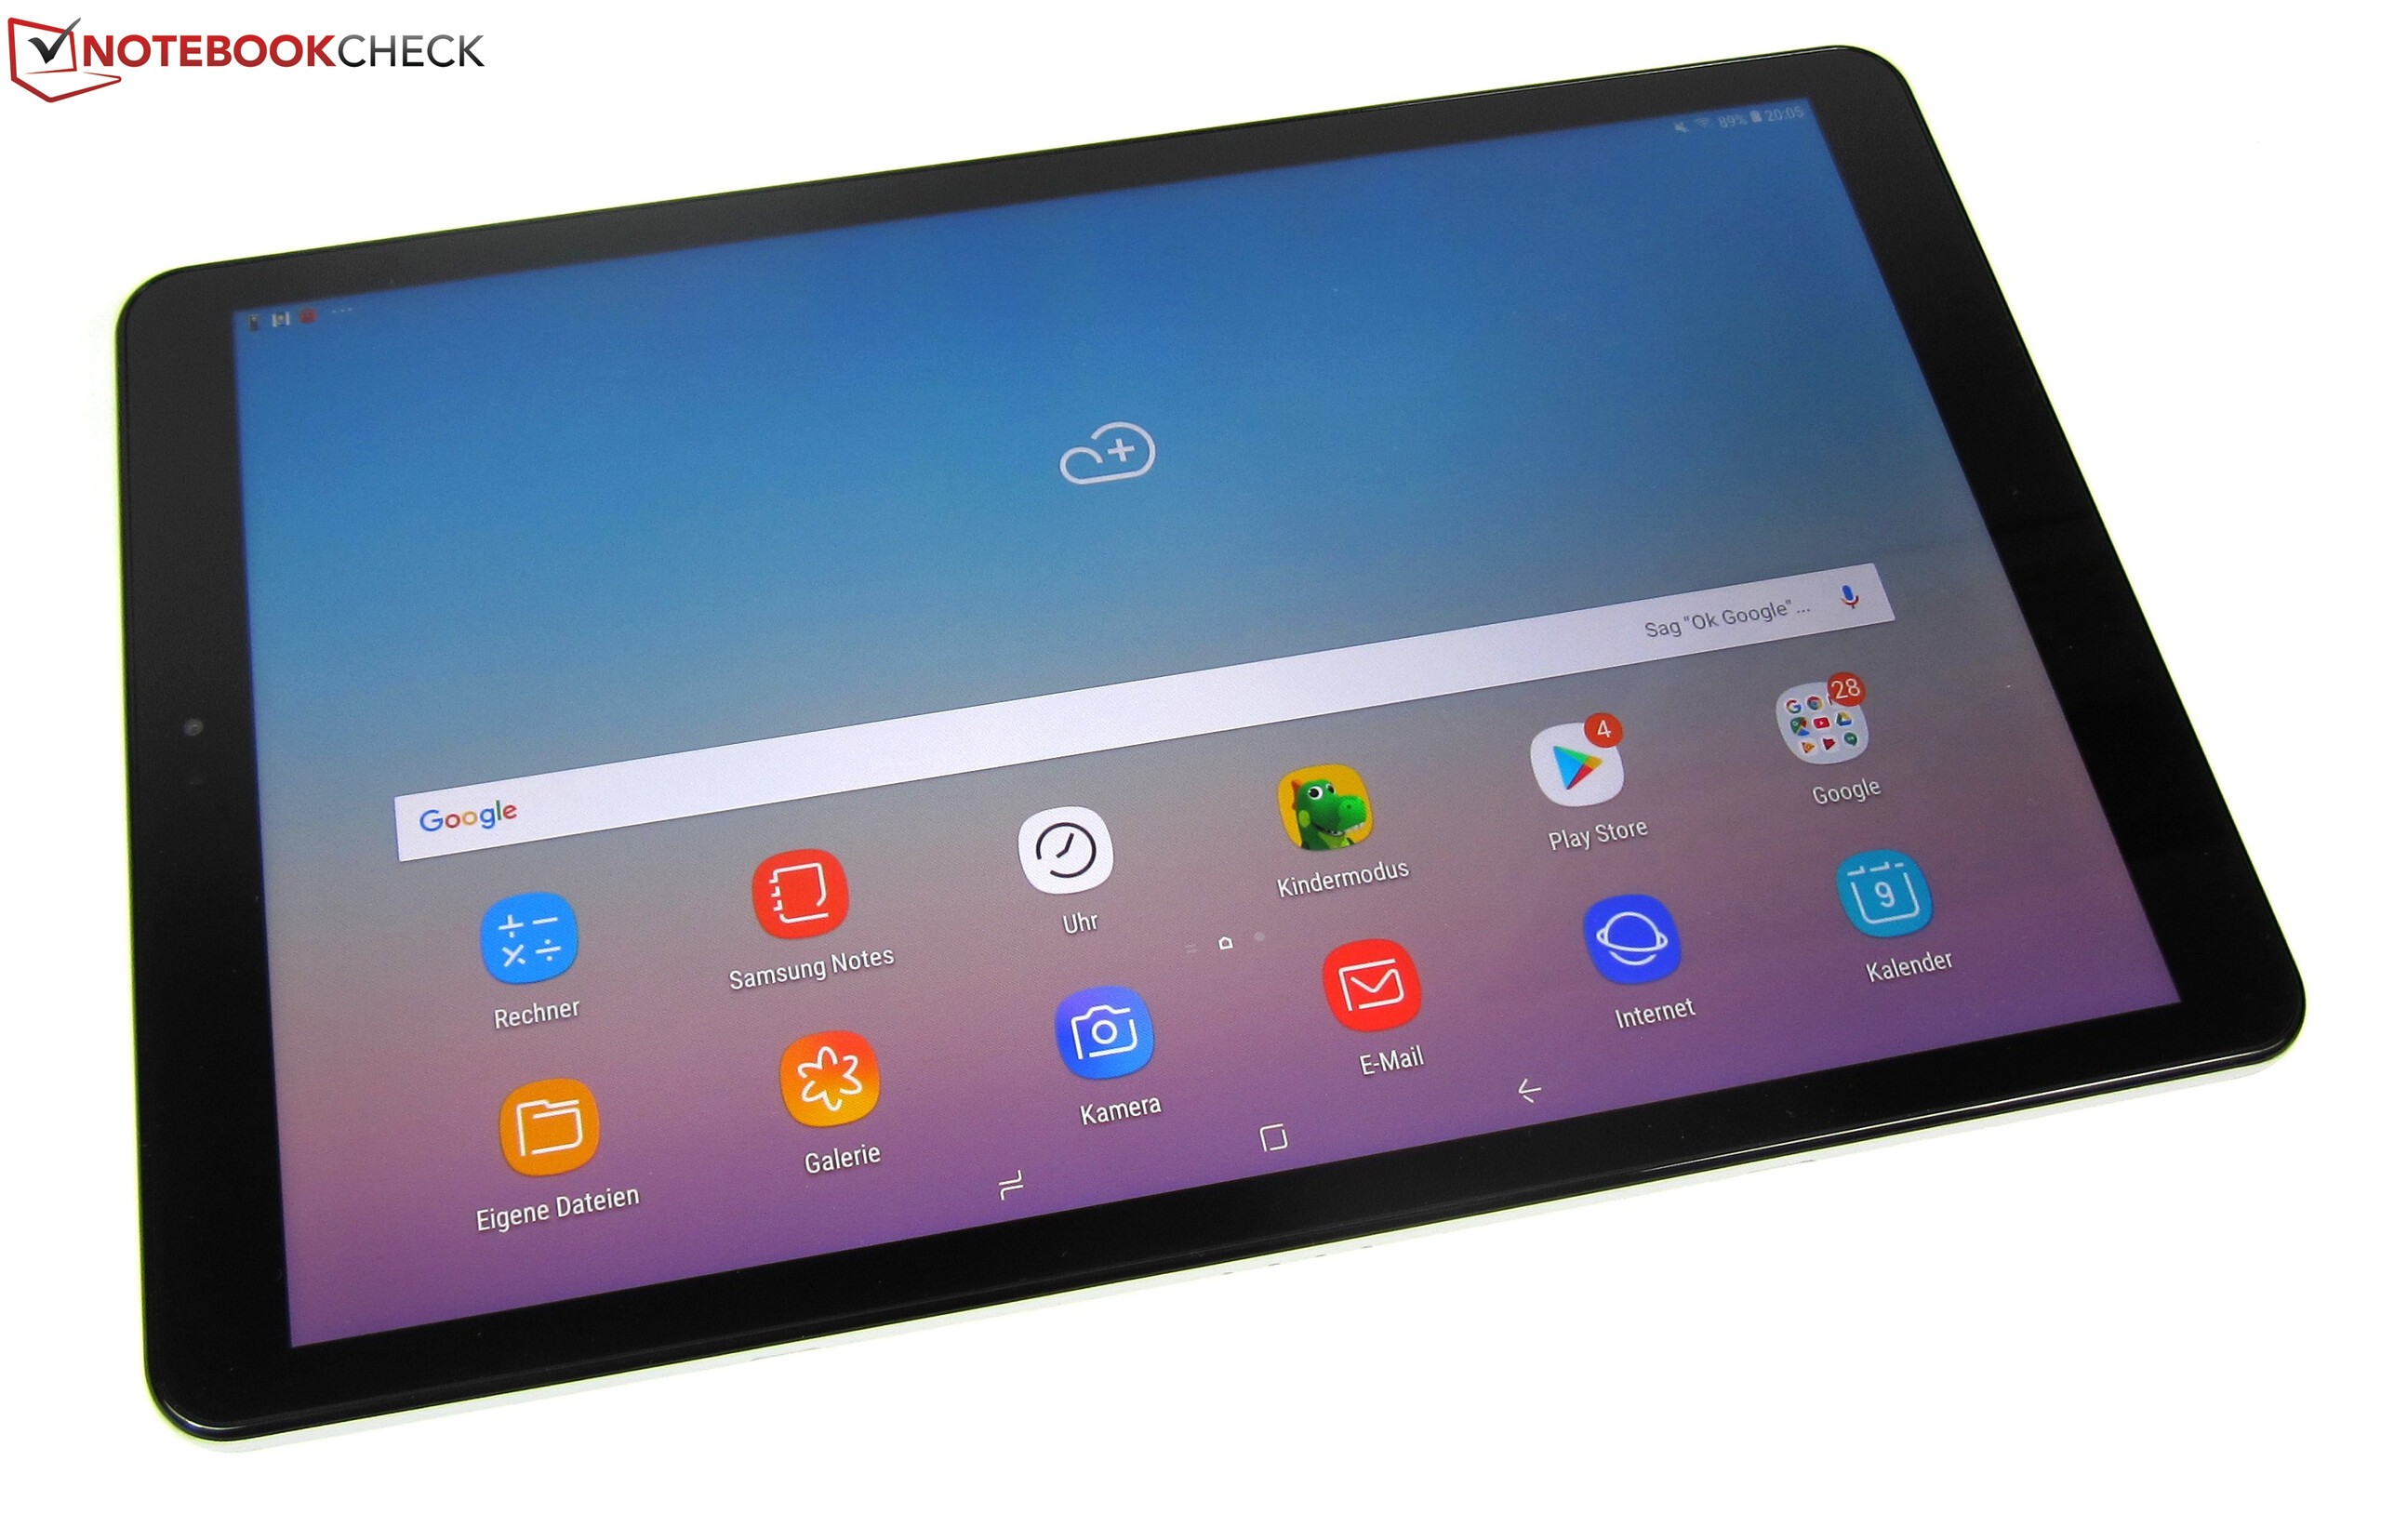 Samsung Galaxy Tab A 10.5 (SM-T590N) Tablet Review - NotebookCheck.net ...